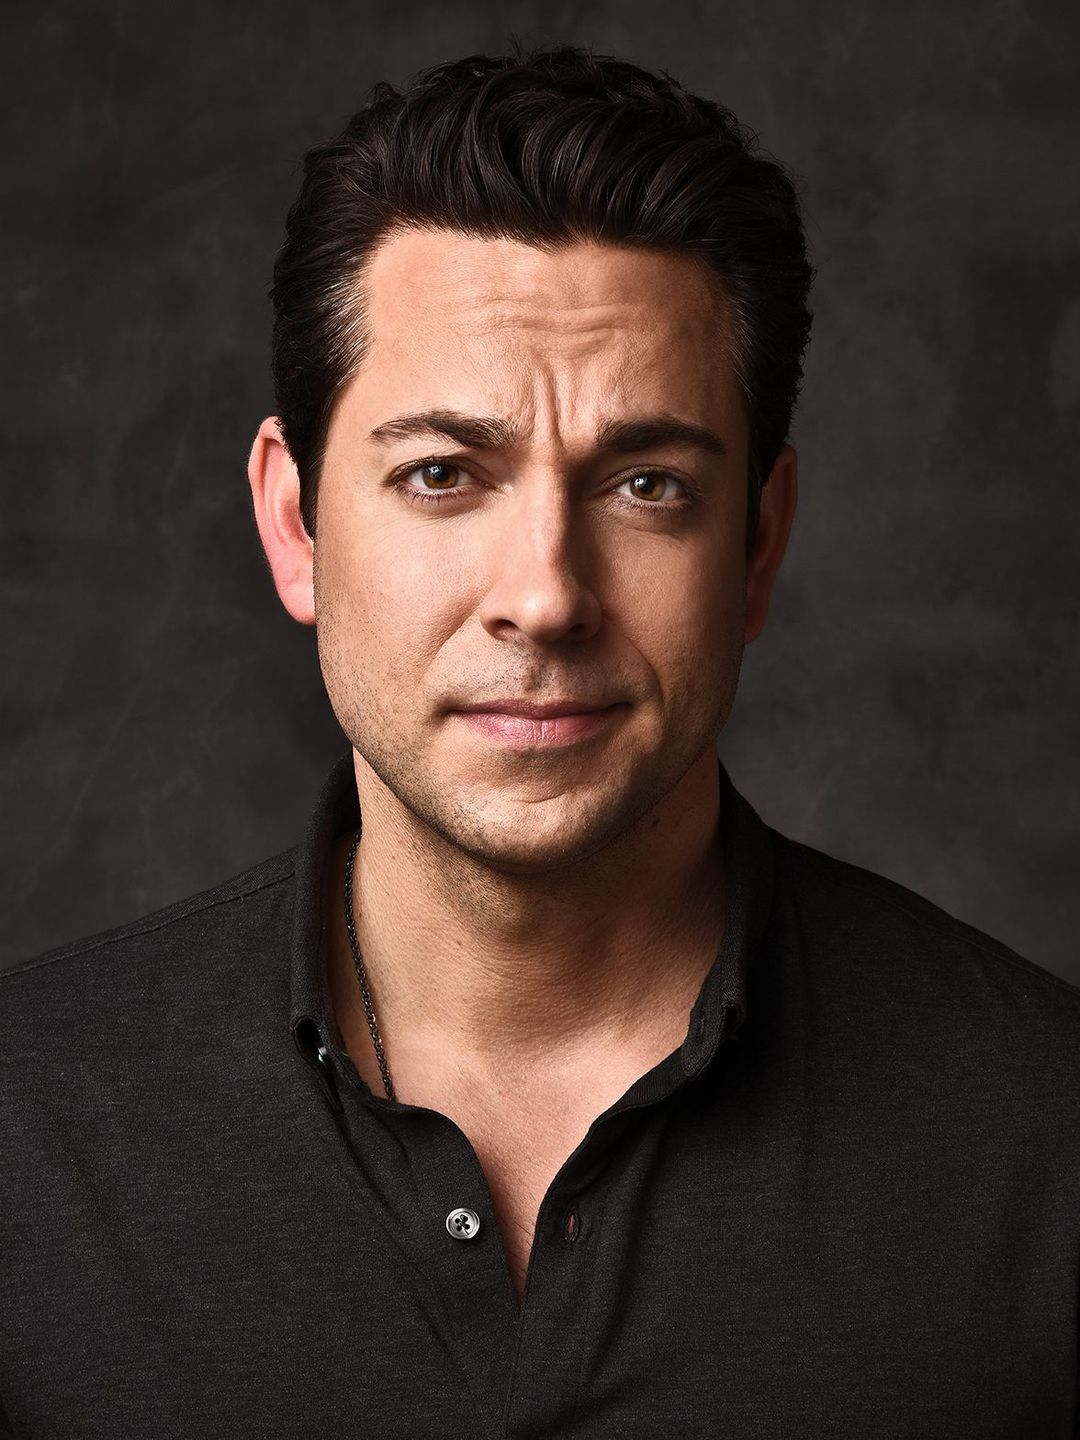 Zachary Levi current look